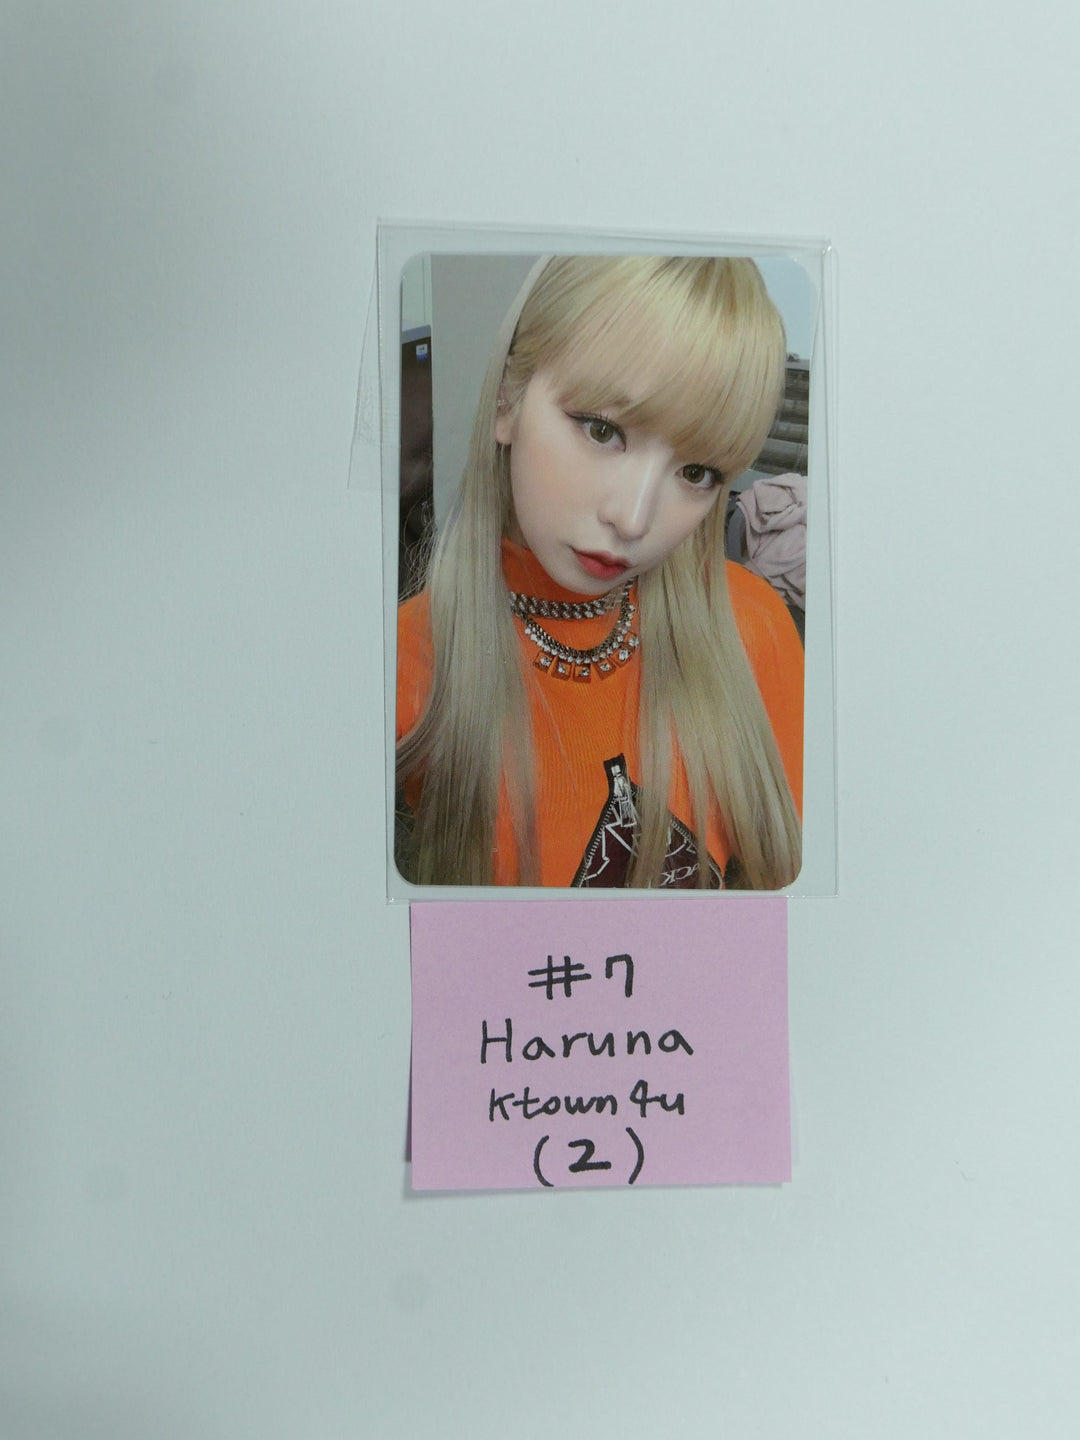 Billlie 'the collective soul and unconscious: chapter one' - Ktown4U Fansign Event Photocard